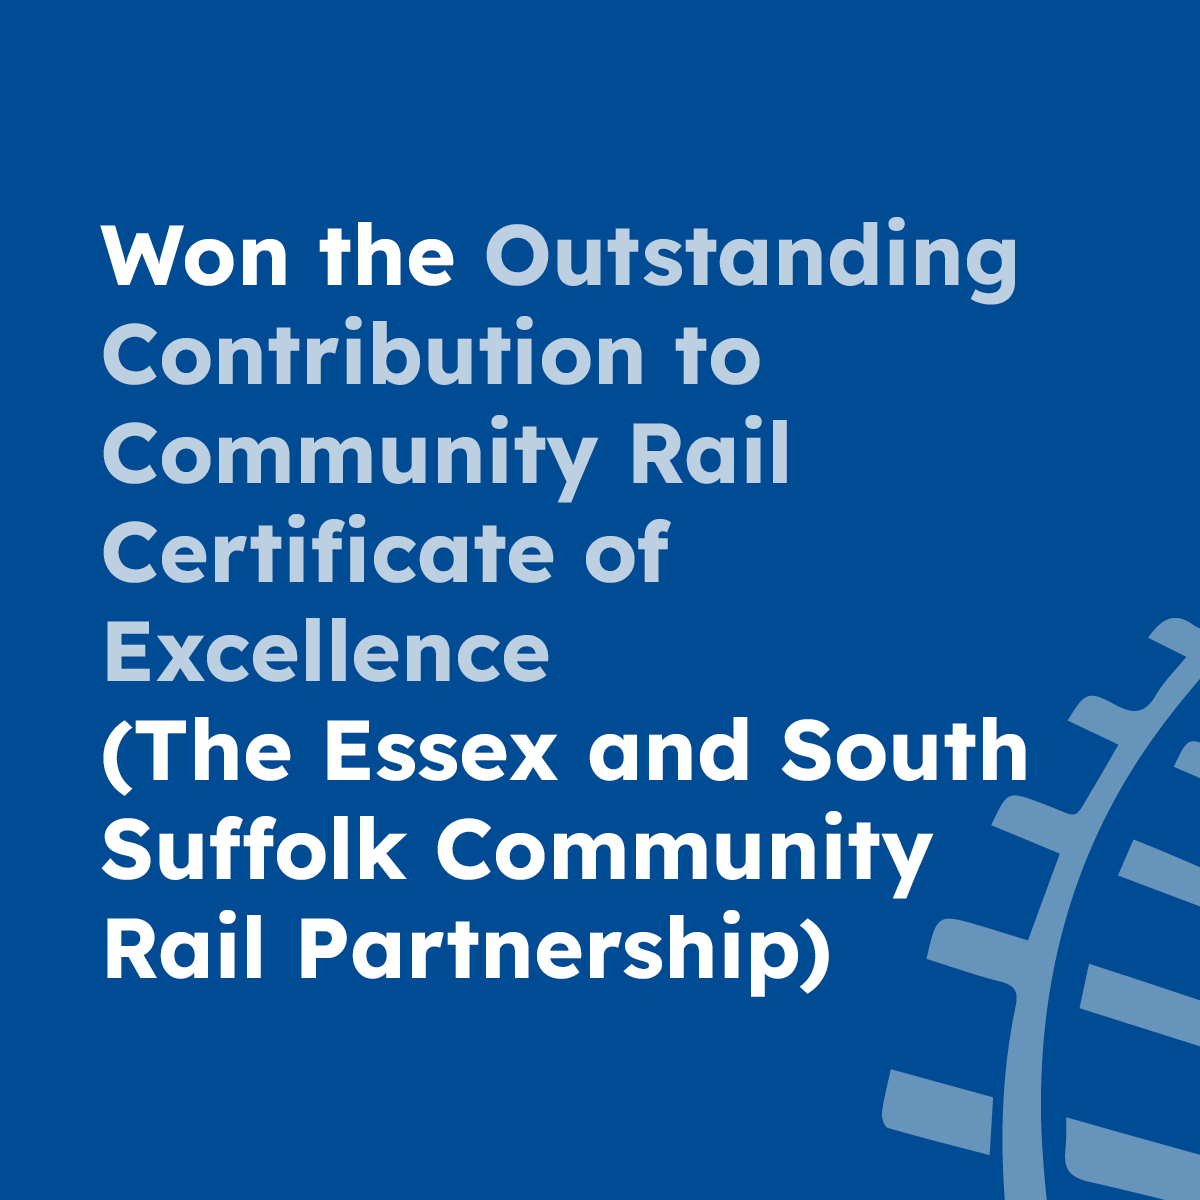 Won the Outstanding Contribution to Community Rail Certificate of Excellence (The Essex and South Suffolk Community Rail Partnership)